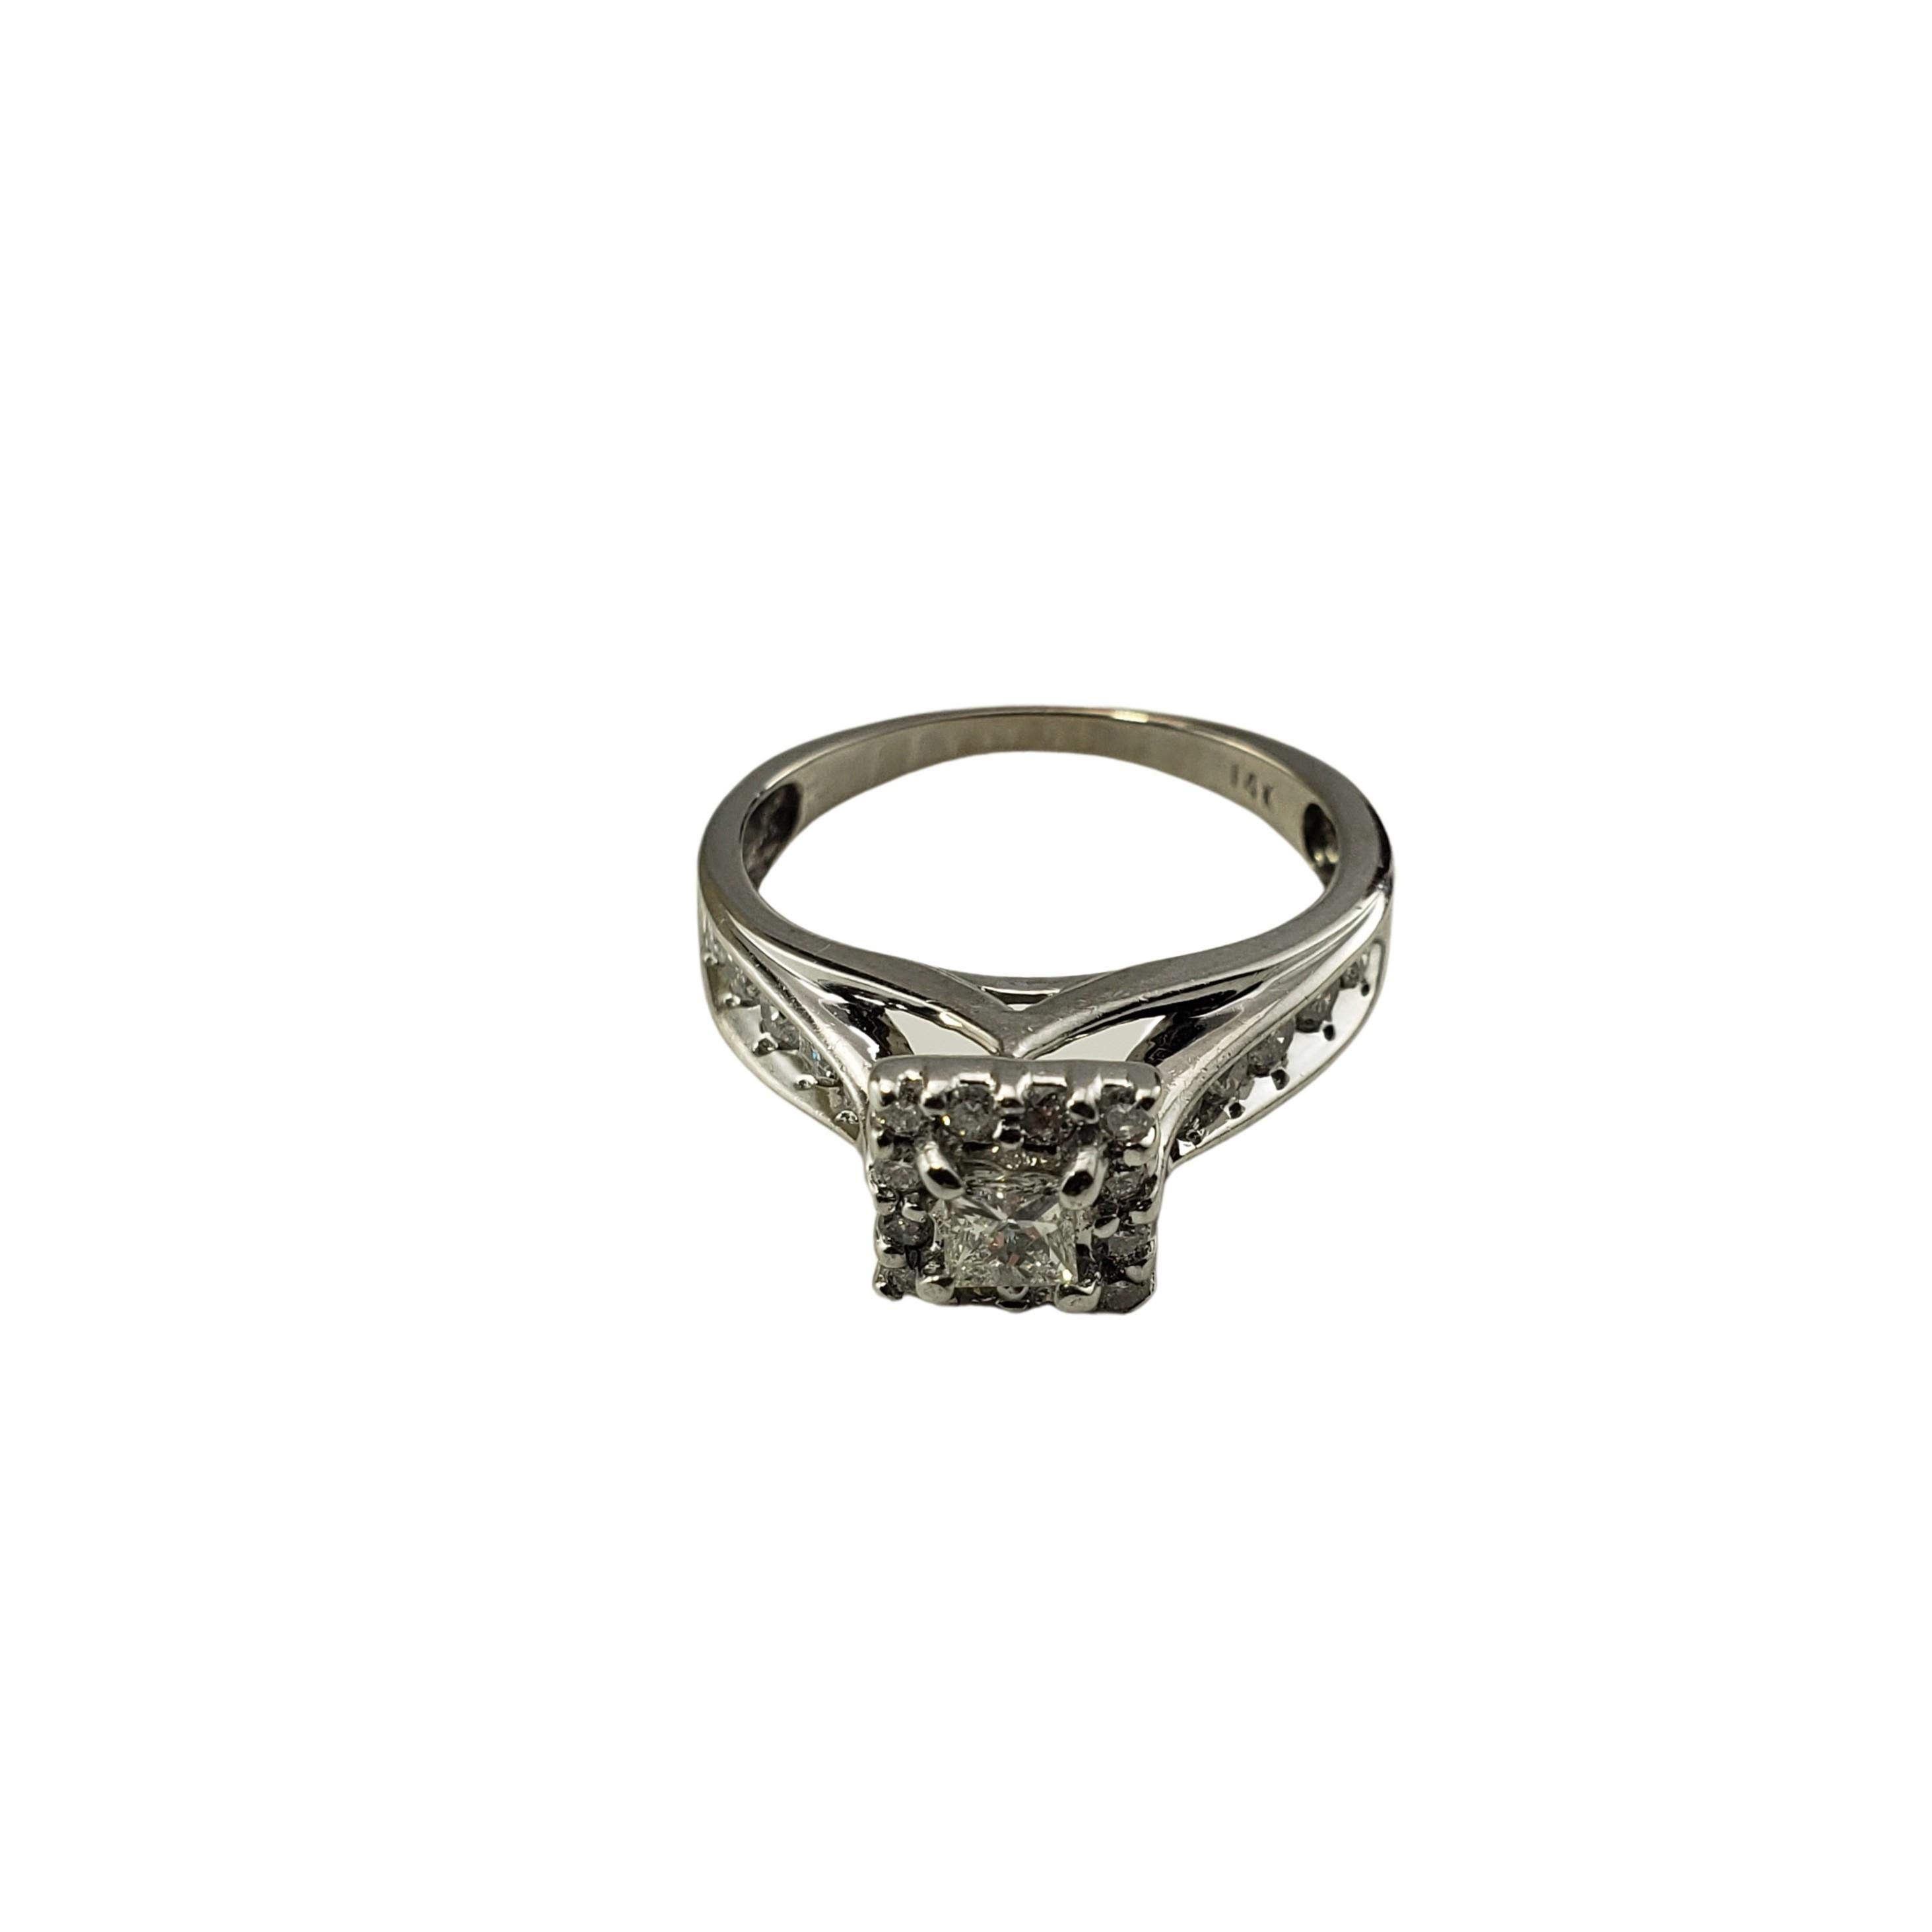 Vintage 14 Karat White Gold and Diamond Ring Size 6-

This sparkling ring features one princess cut diamond (.15 ct.) surrounded by 22 round brilliant cut diamond set in classic 14K white gold.  Width:  7 mm.  Shank: 1.5 mm.

Approximate total